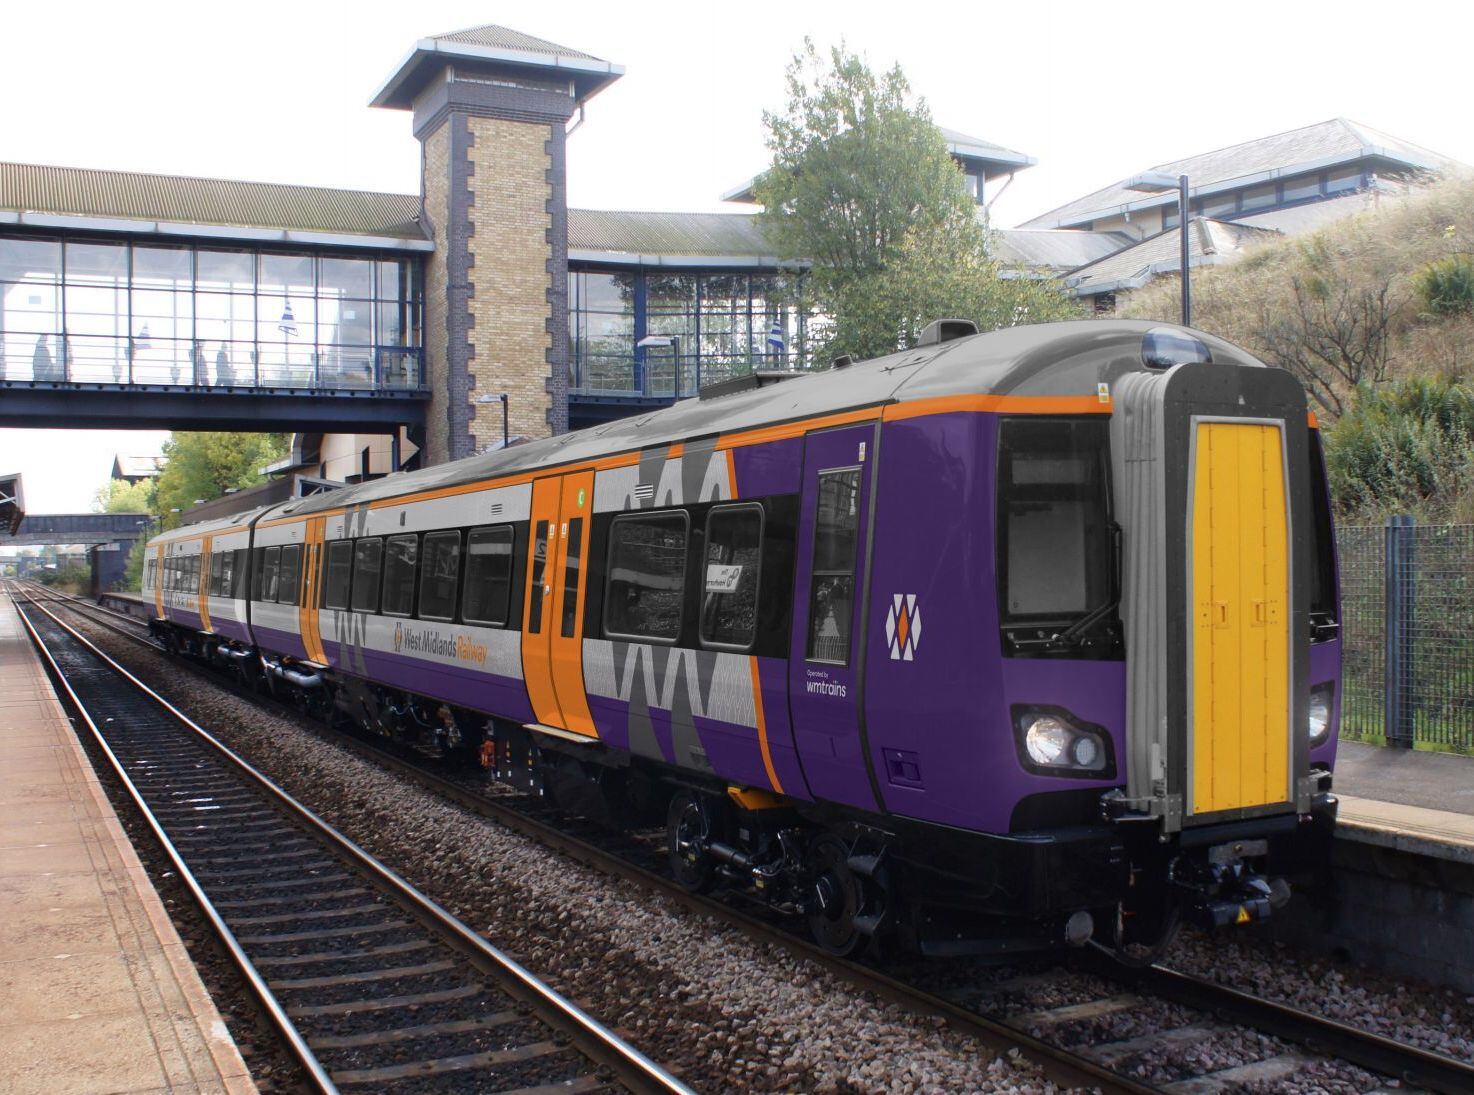 Train services disrupted between Telford and Wolverhampton over trespassers on railway